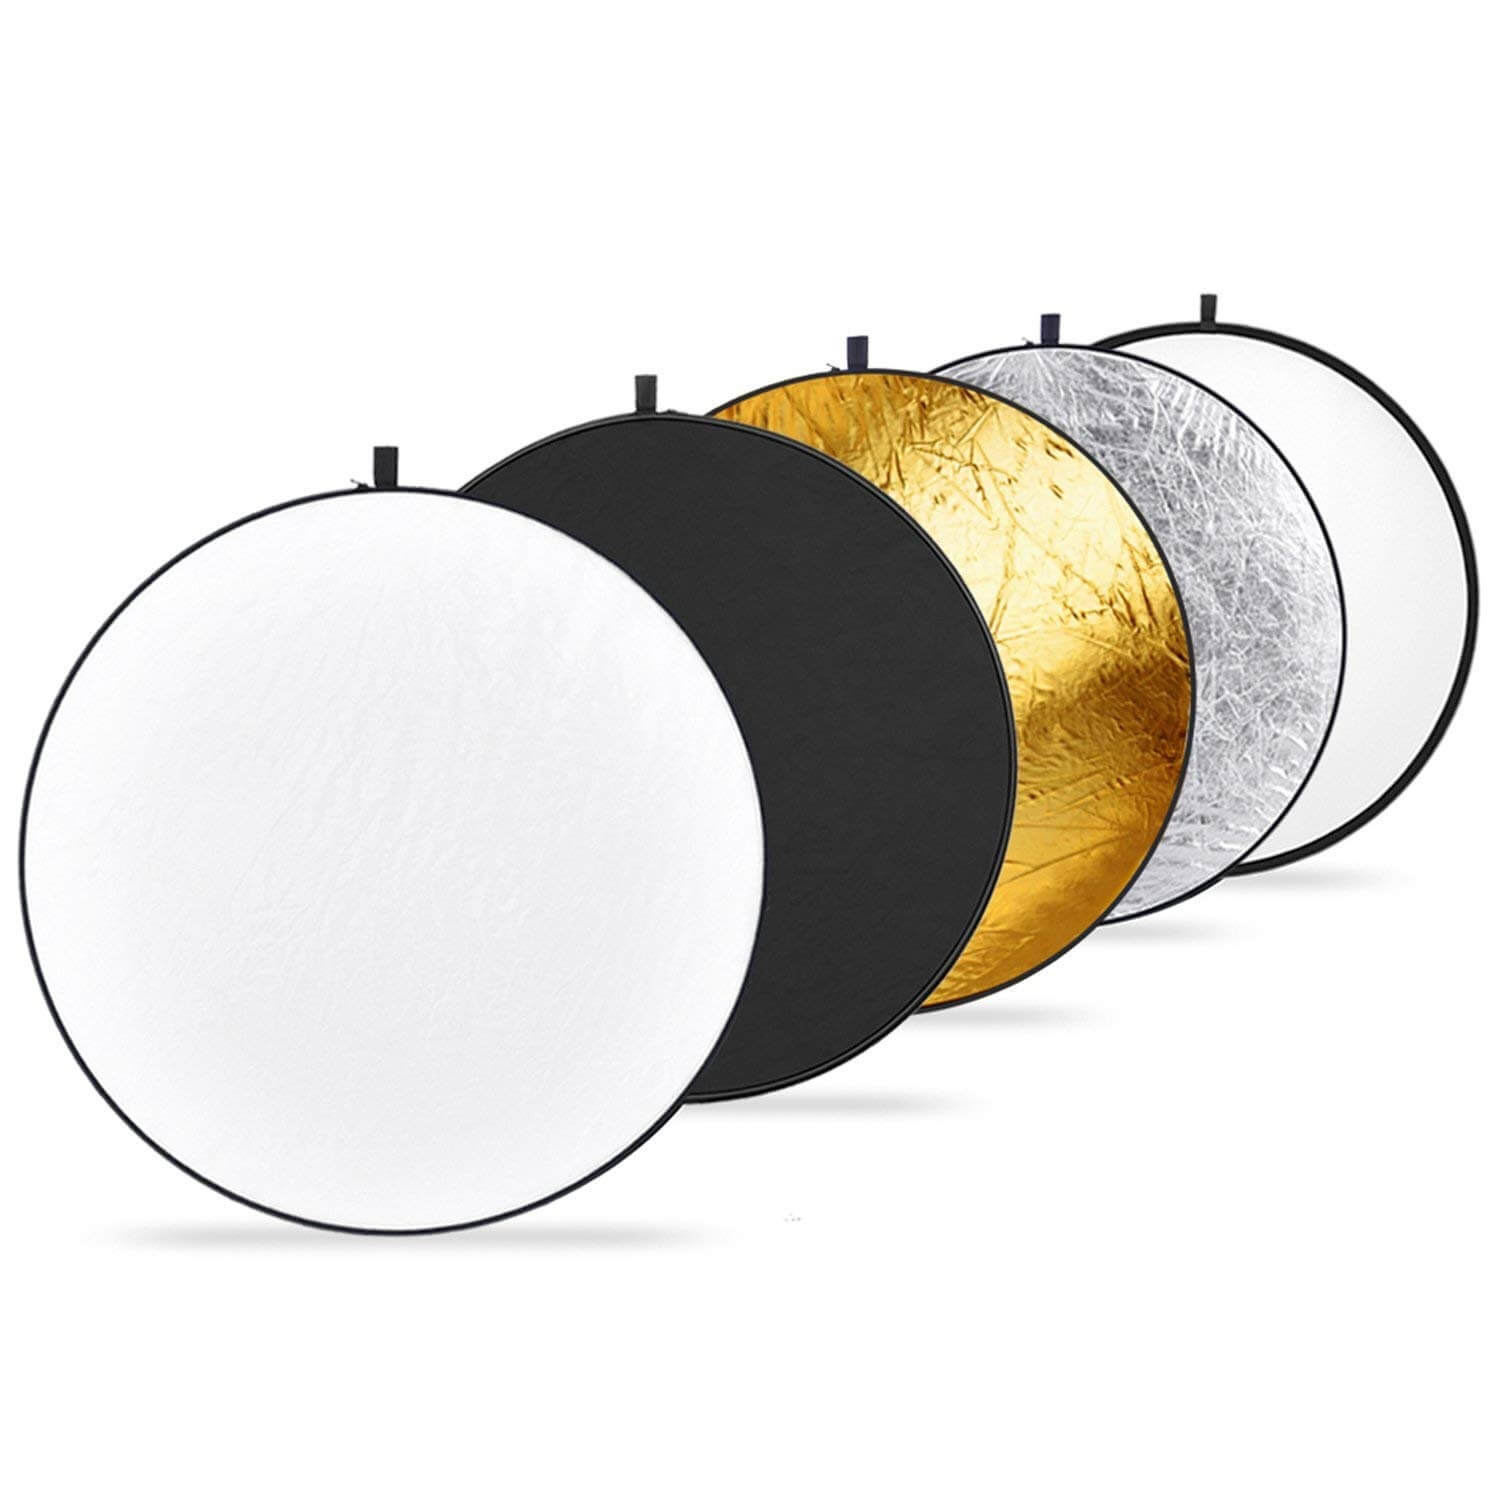 5 in 1 reflector example with different lights: white, black, gold, silver, no cover.